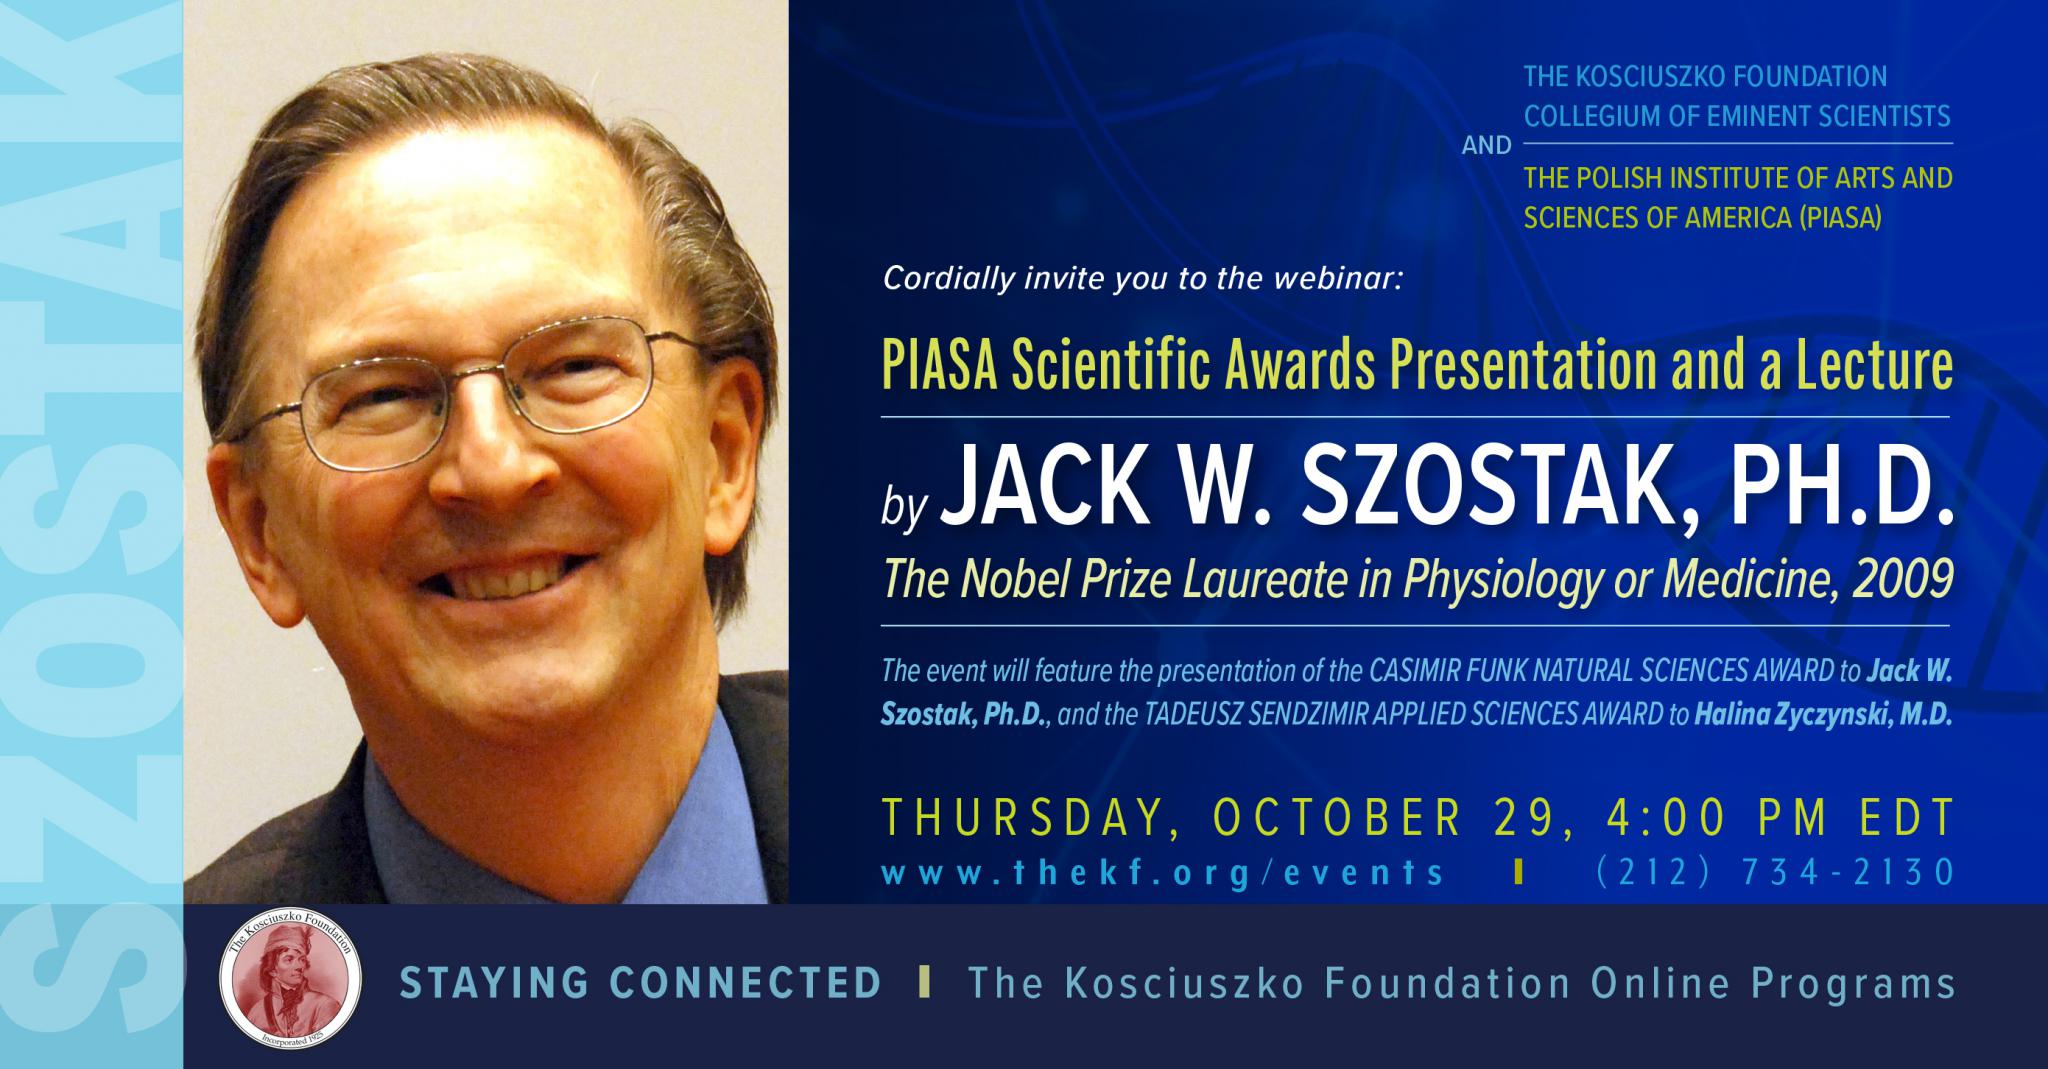 KF ONLINE PROGRAMS PIASA Scientific Awards Presentation and a Lecture by Jack Szostak, Ph.D.